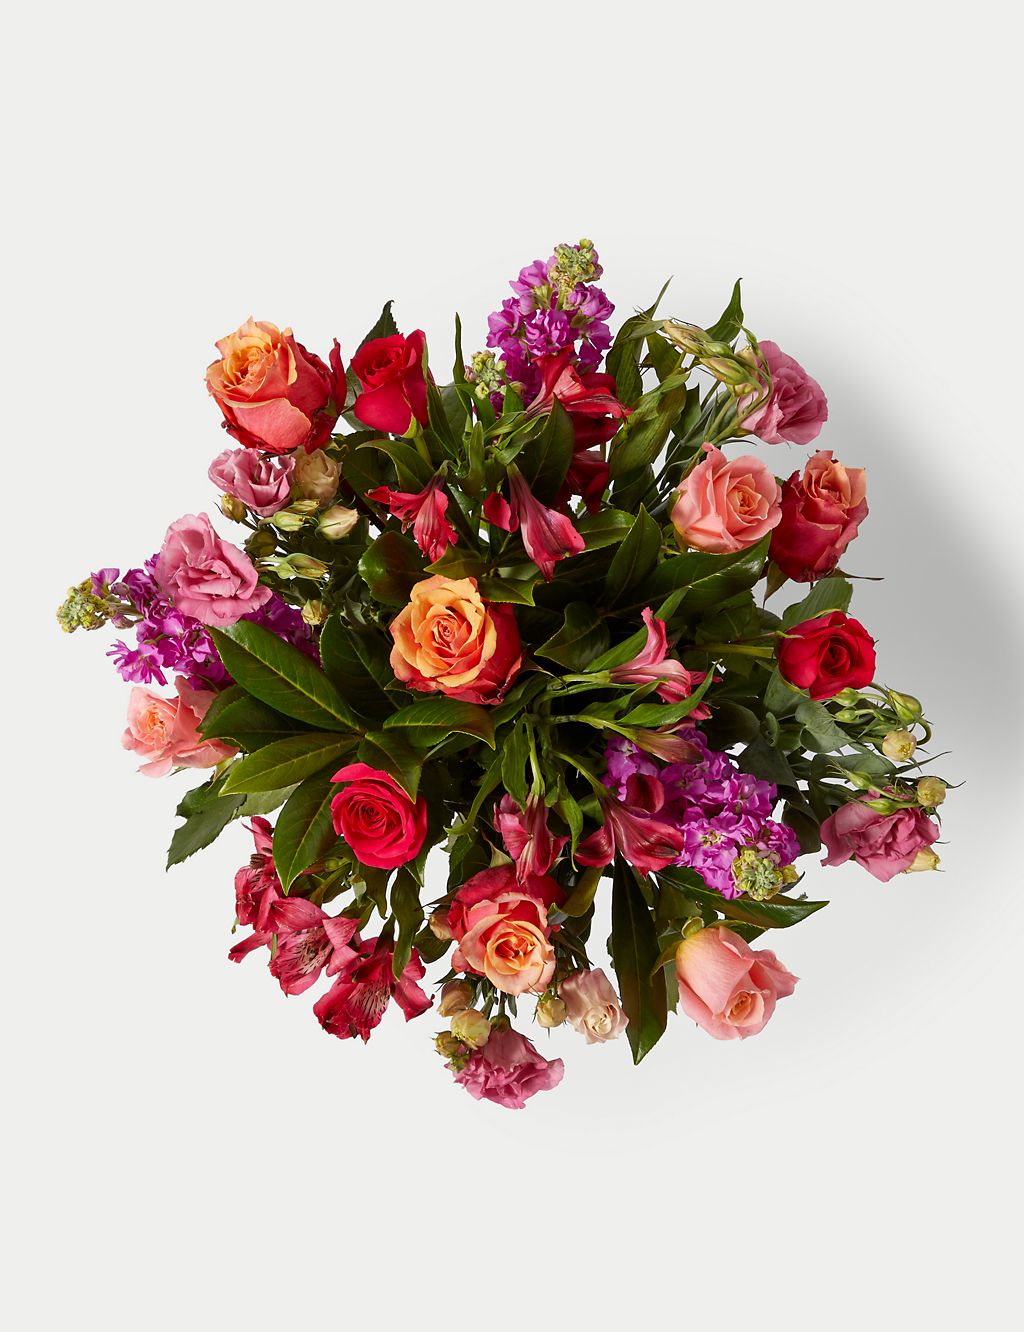 Roses, Lisianthus & Stock Bright Bouquet 1 of 6